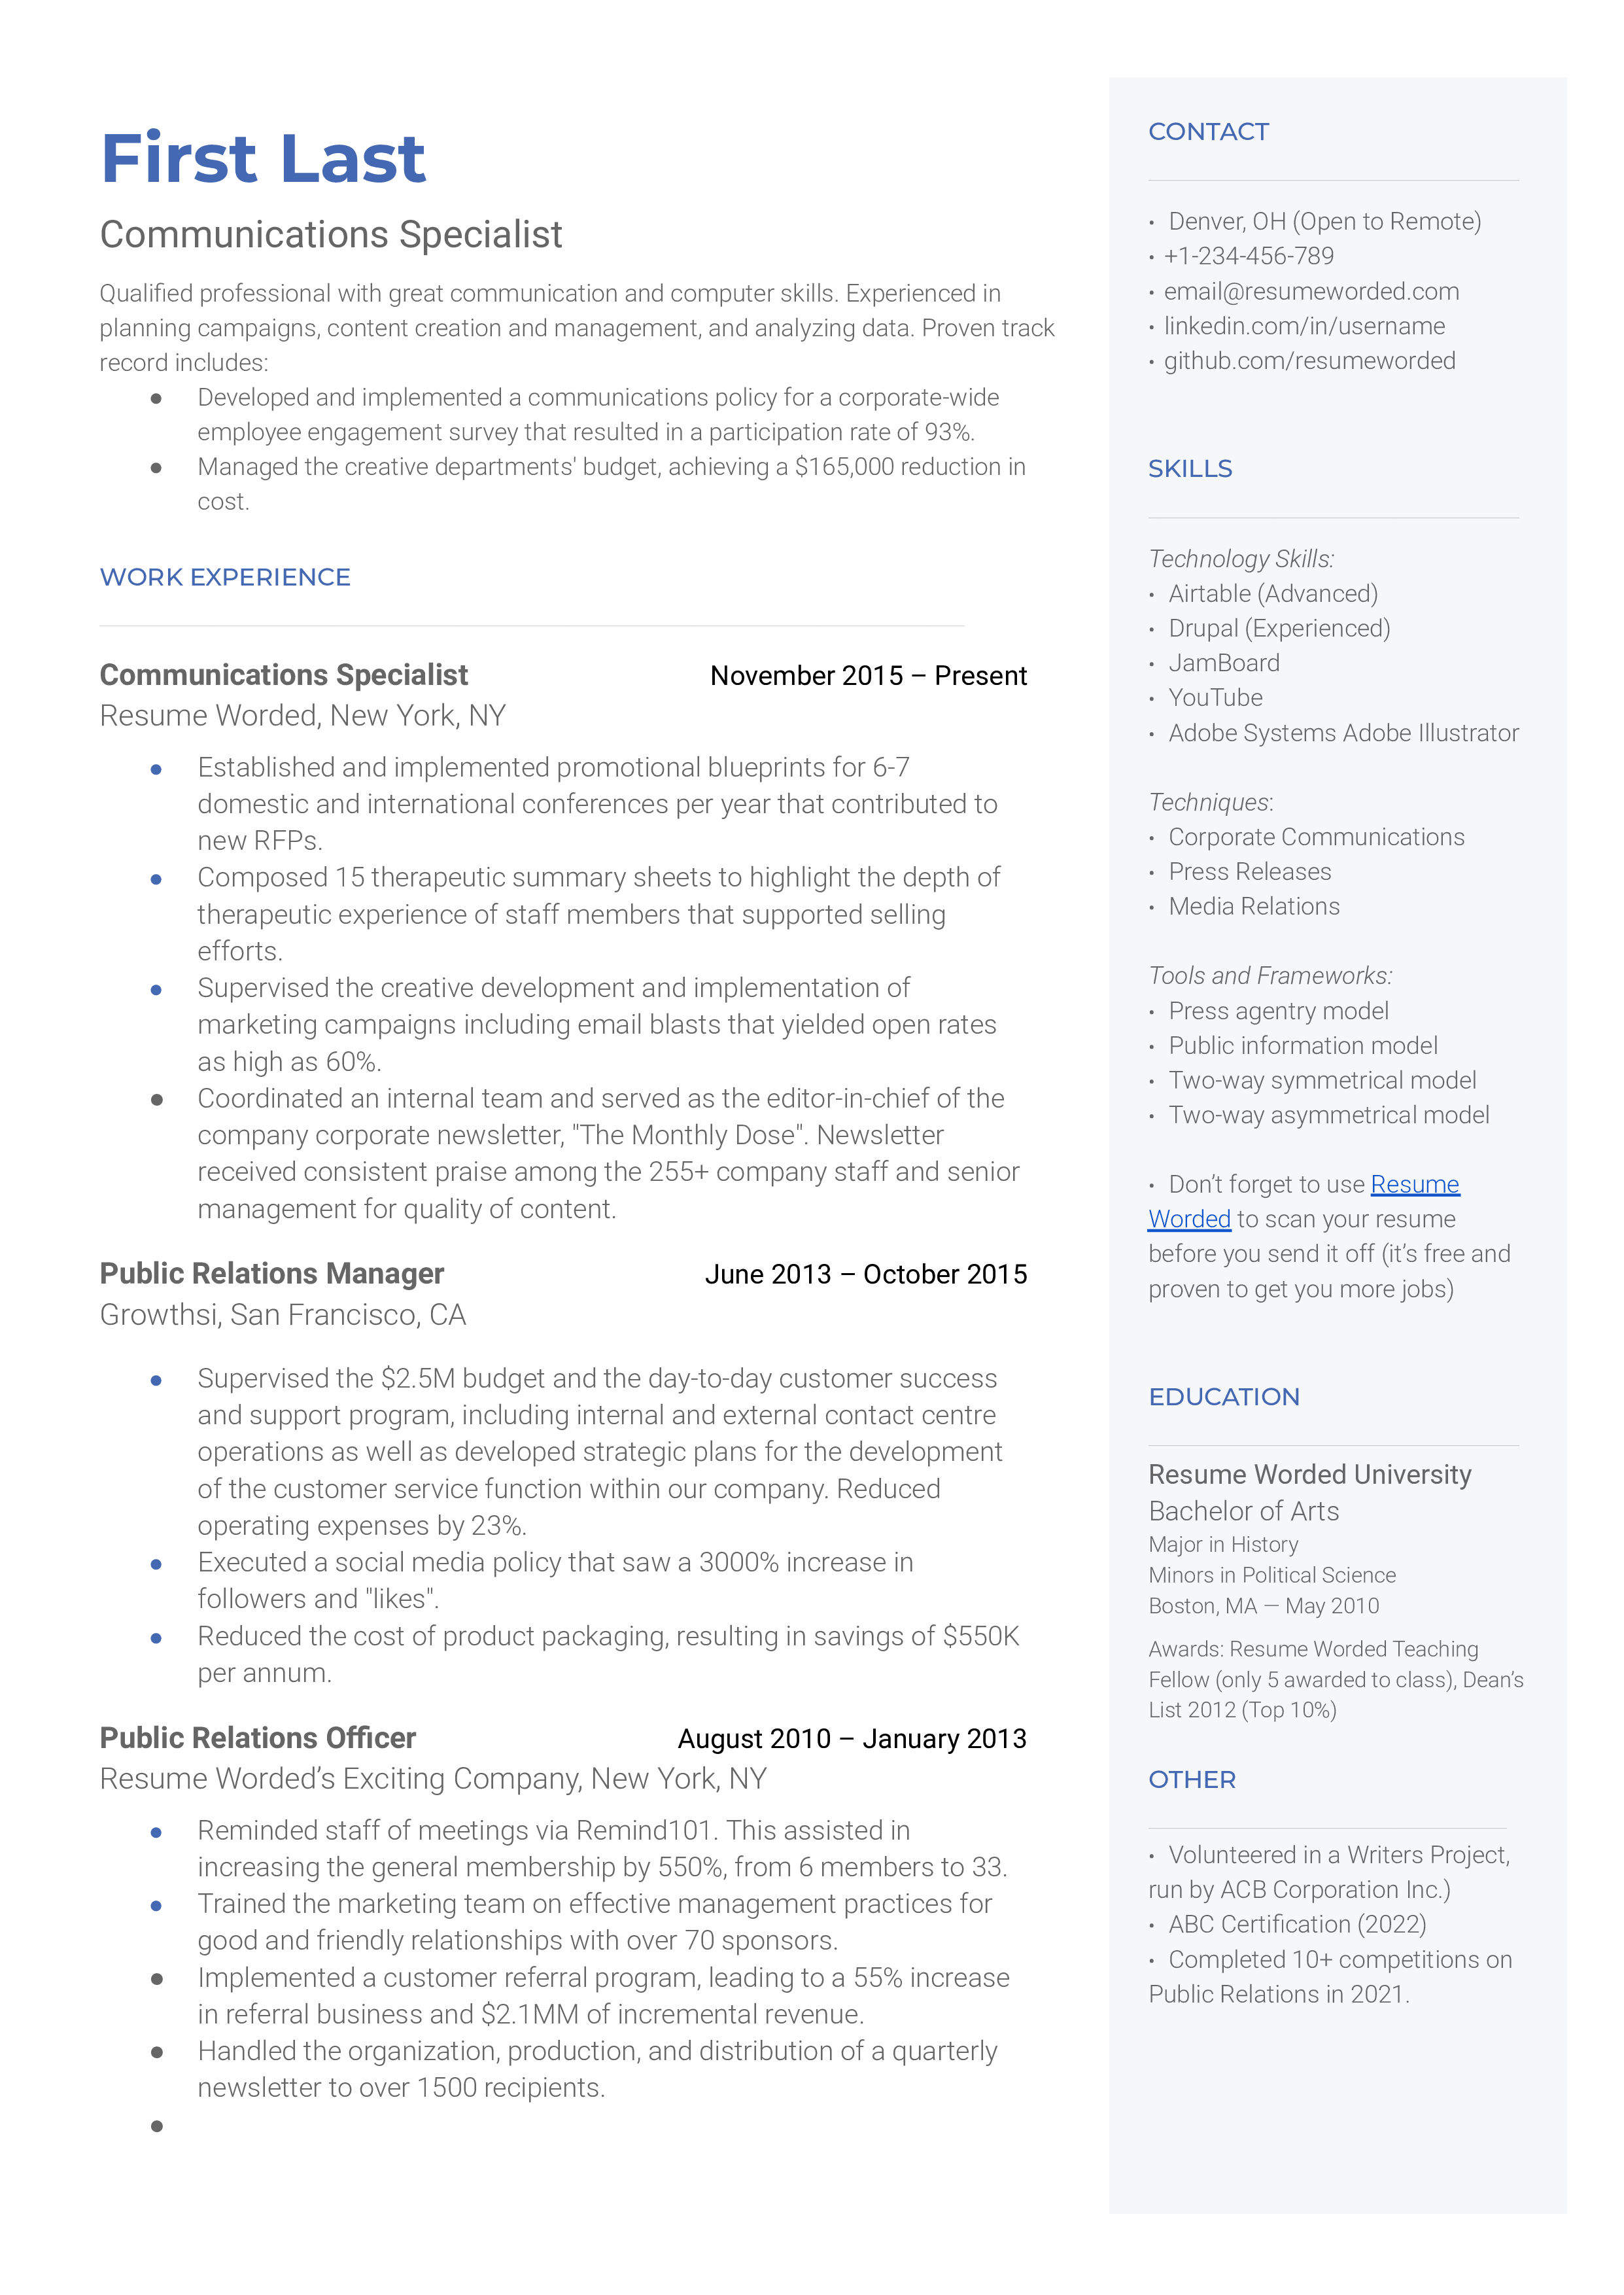 Communications Specialist Resume Sample